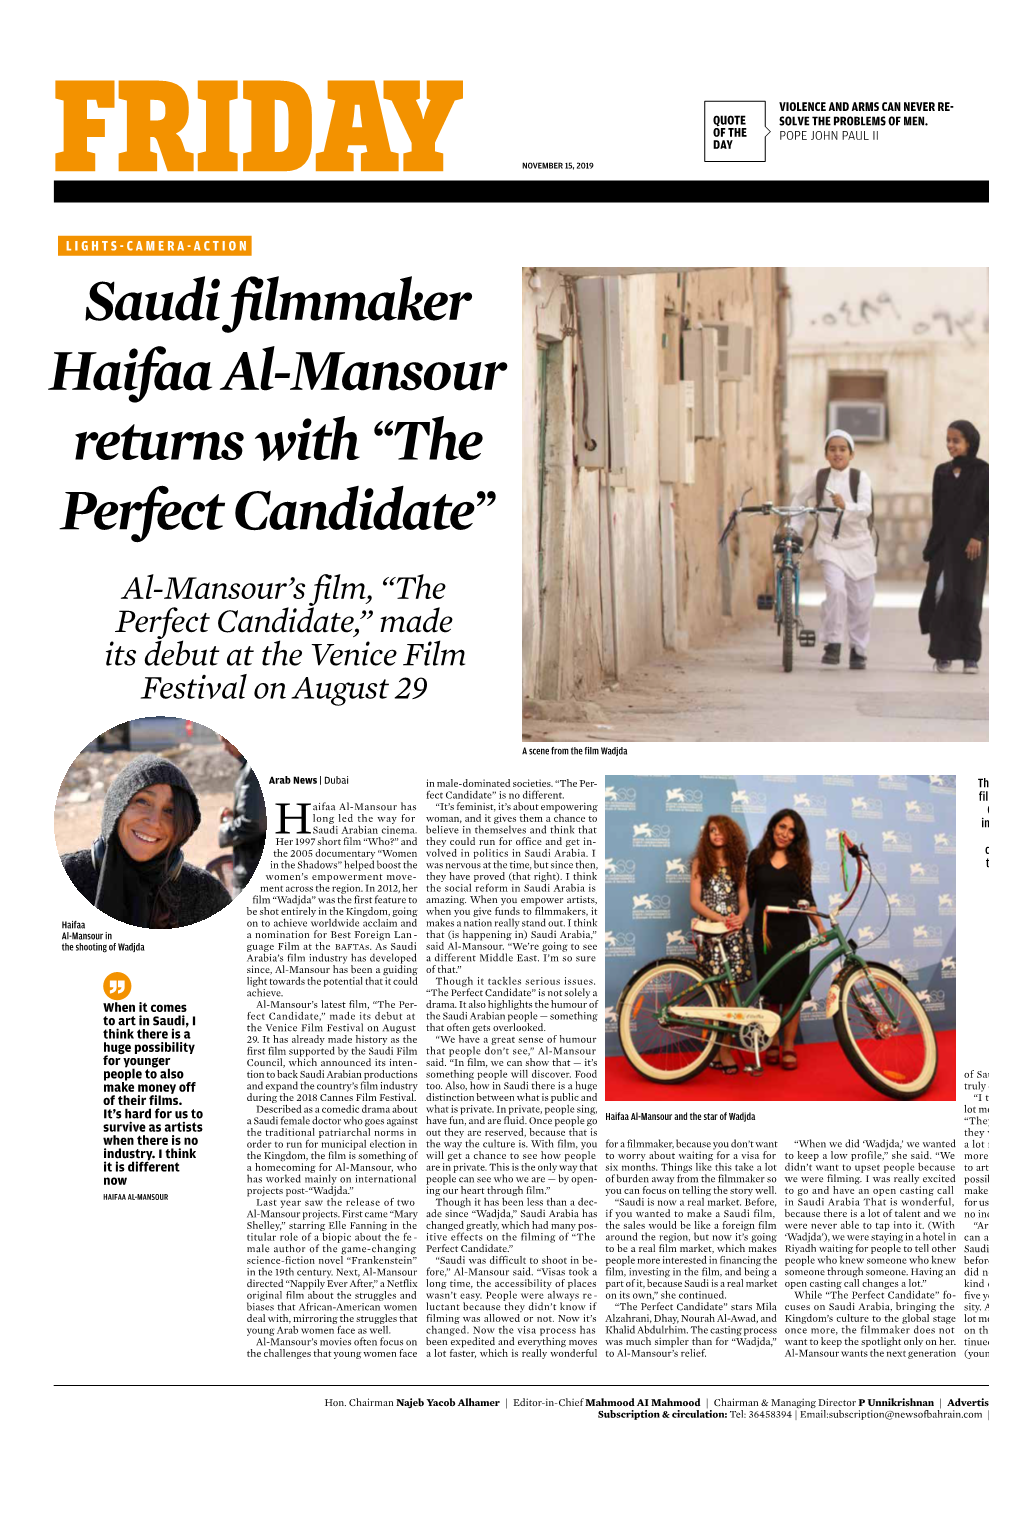 Saudi Filmmaker Haifaa Al-Mansour Returns with “The Perfect Candidate”